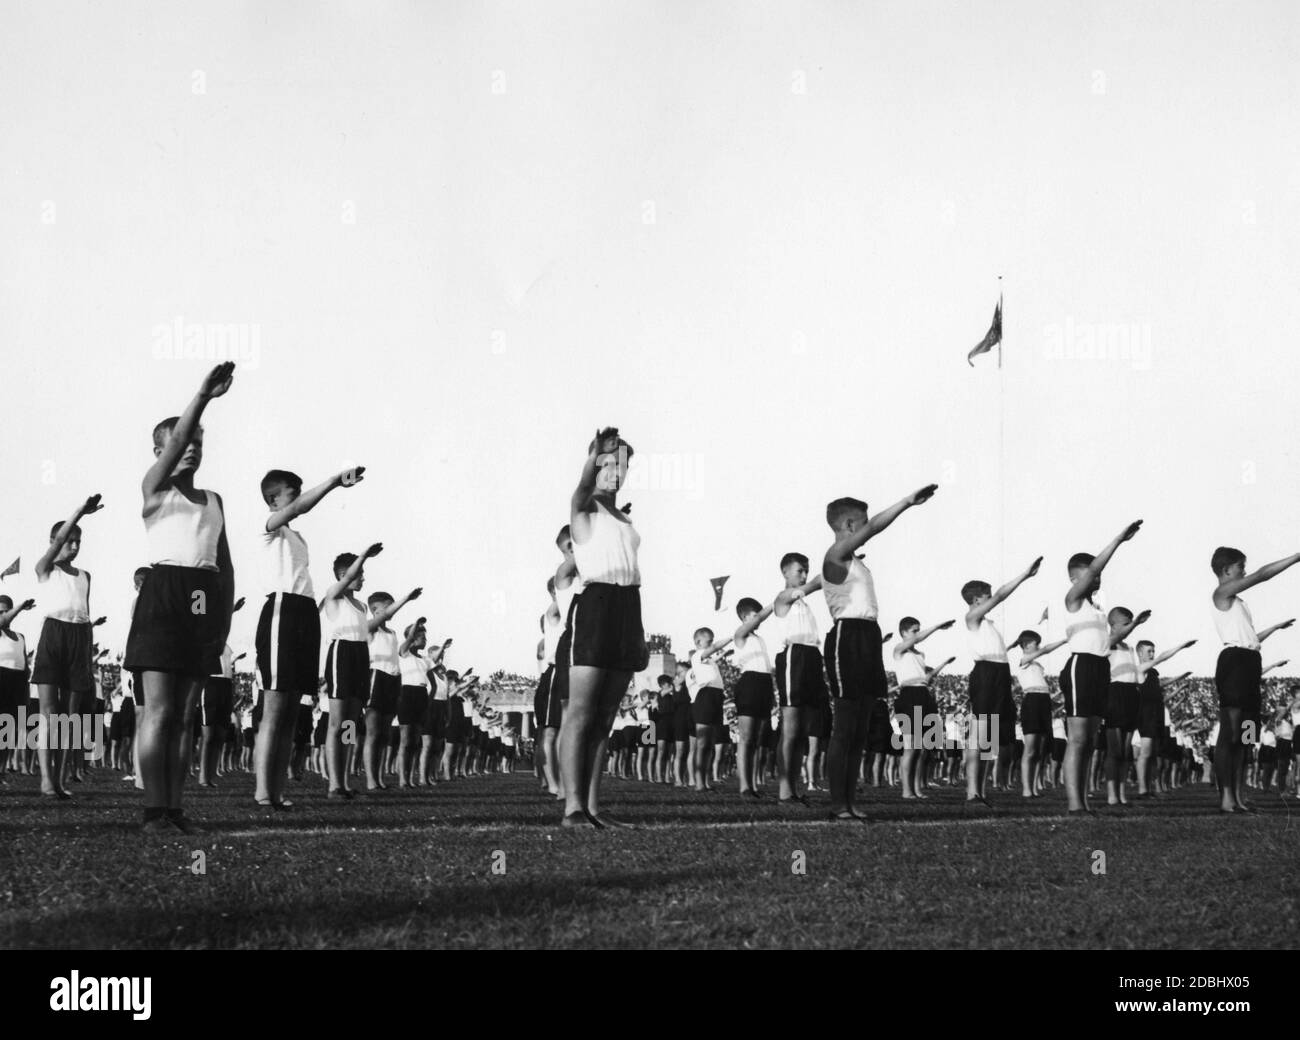 'In the Deutsches Stadion of Berlin at the ''Fest der Deutschen Schule'' (Festival of the German School), 10-year-old boys in rank and file greet with the Hitler salute in front of 30,000 spectators.' Stock Photo